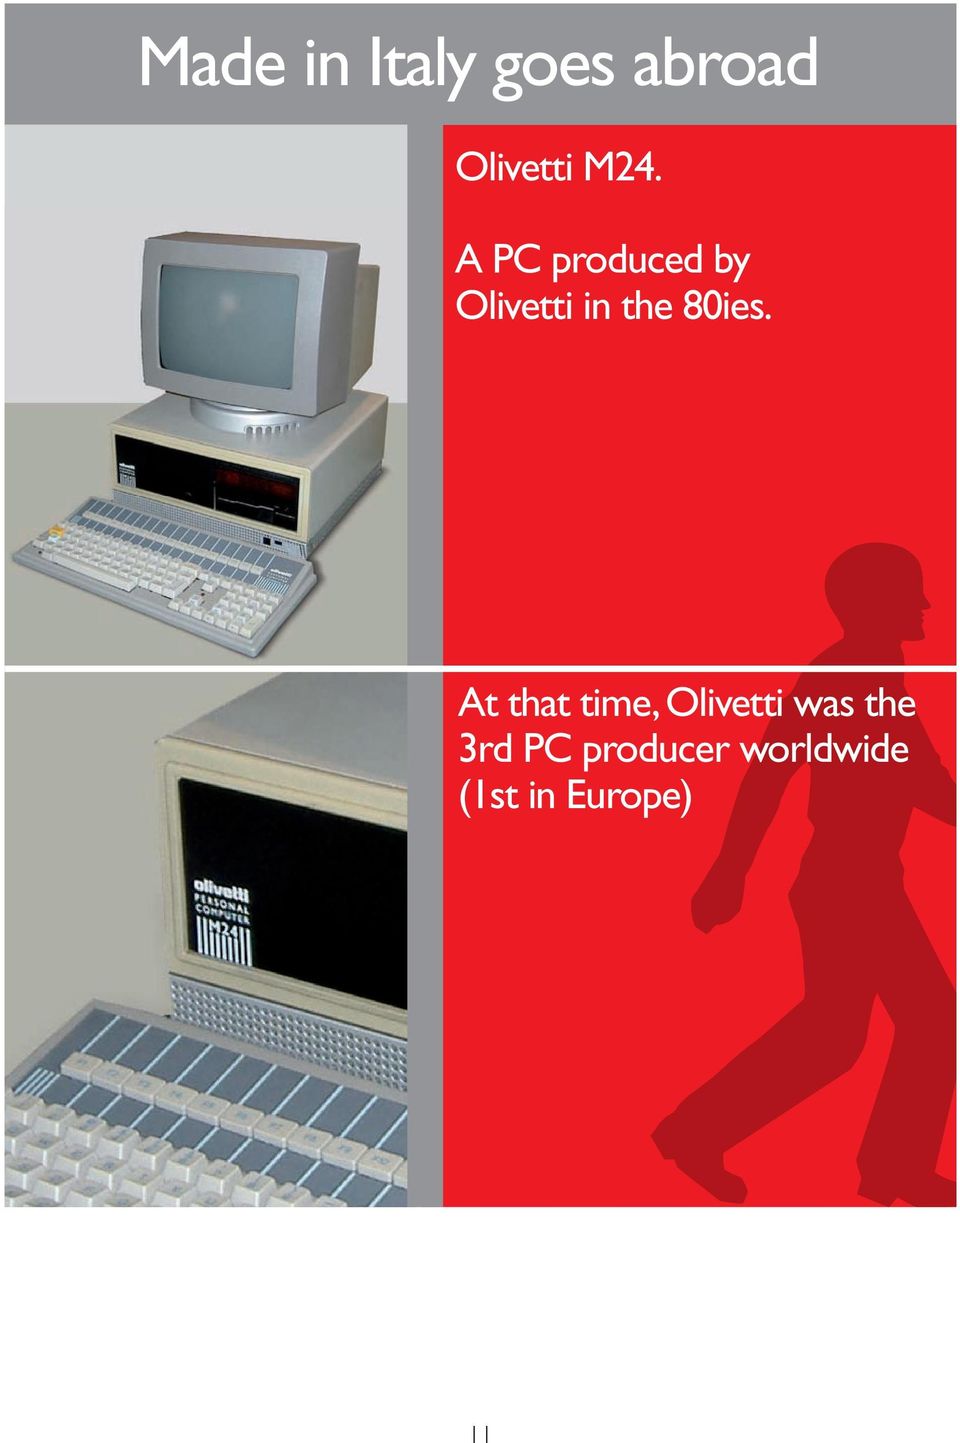 At that time, Olivetti was the 3rd PC